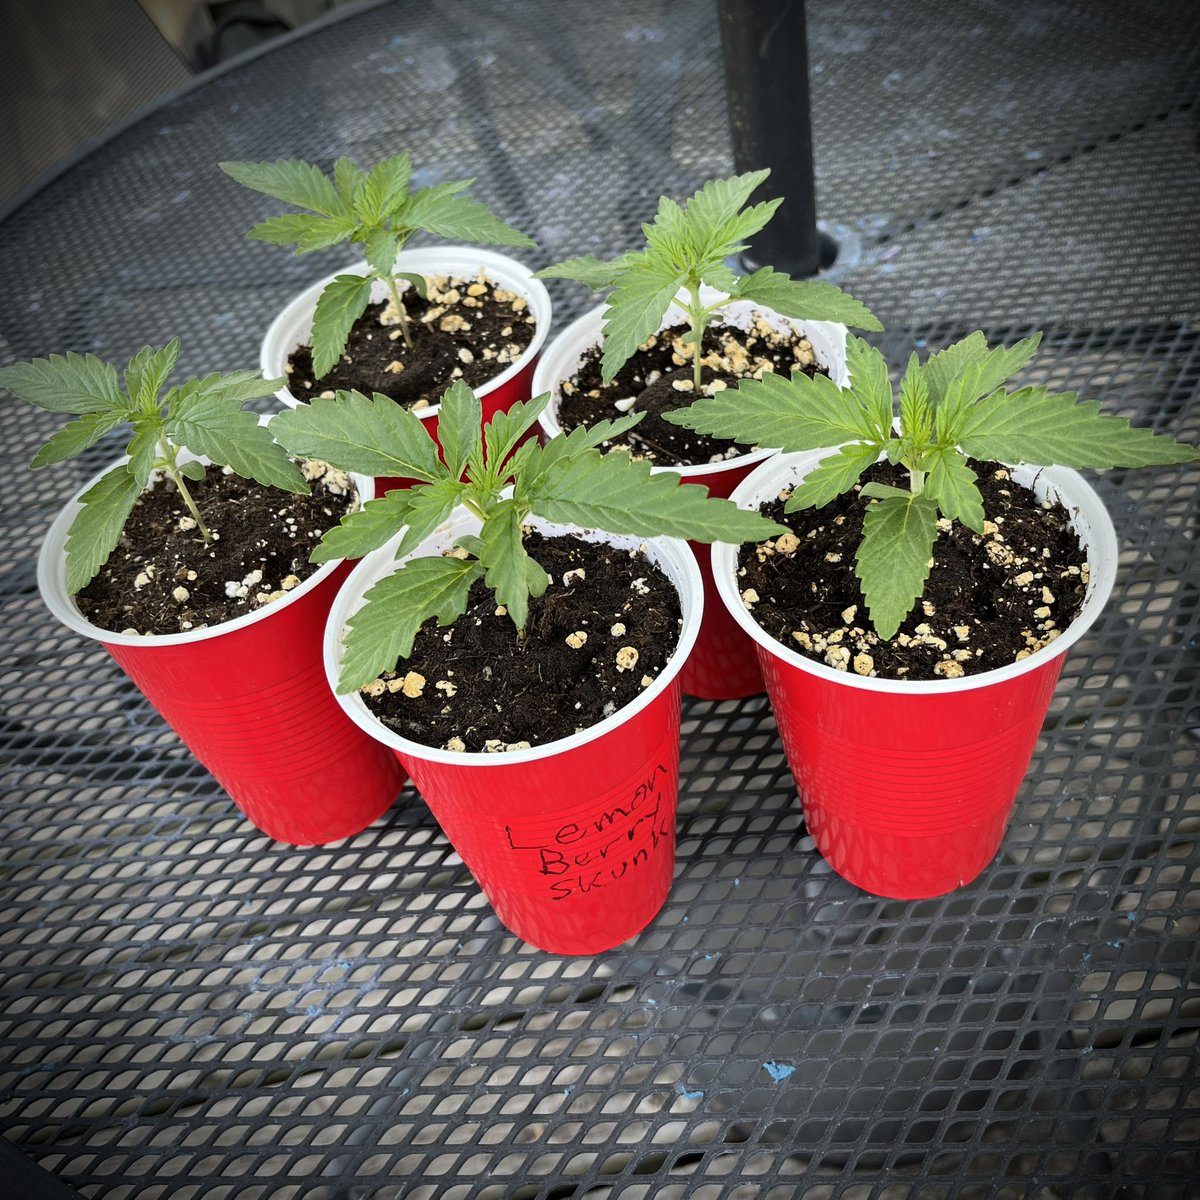 Outdoor grow after 2 weeks. Ready to transplant to bigger pots. Lemon Berry Skunk, Lilac Grape Diesel, and Diesel. All Aeque Genetics!

#cannabisgrowers #cannabisplants #cannabiscommunity #growuourown